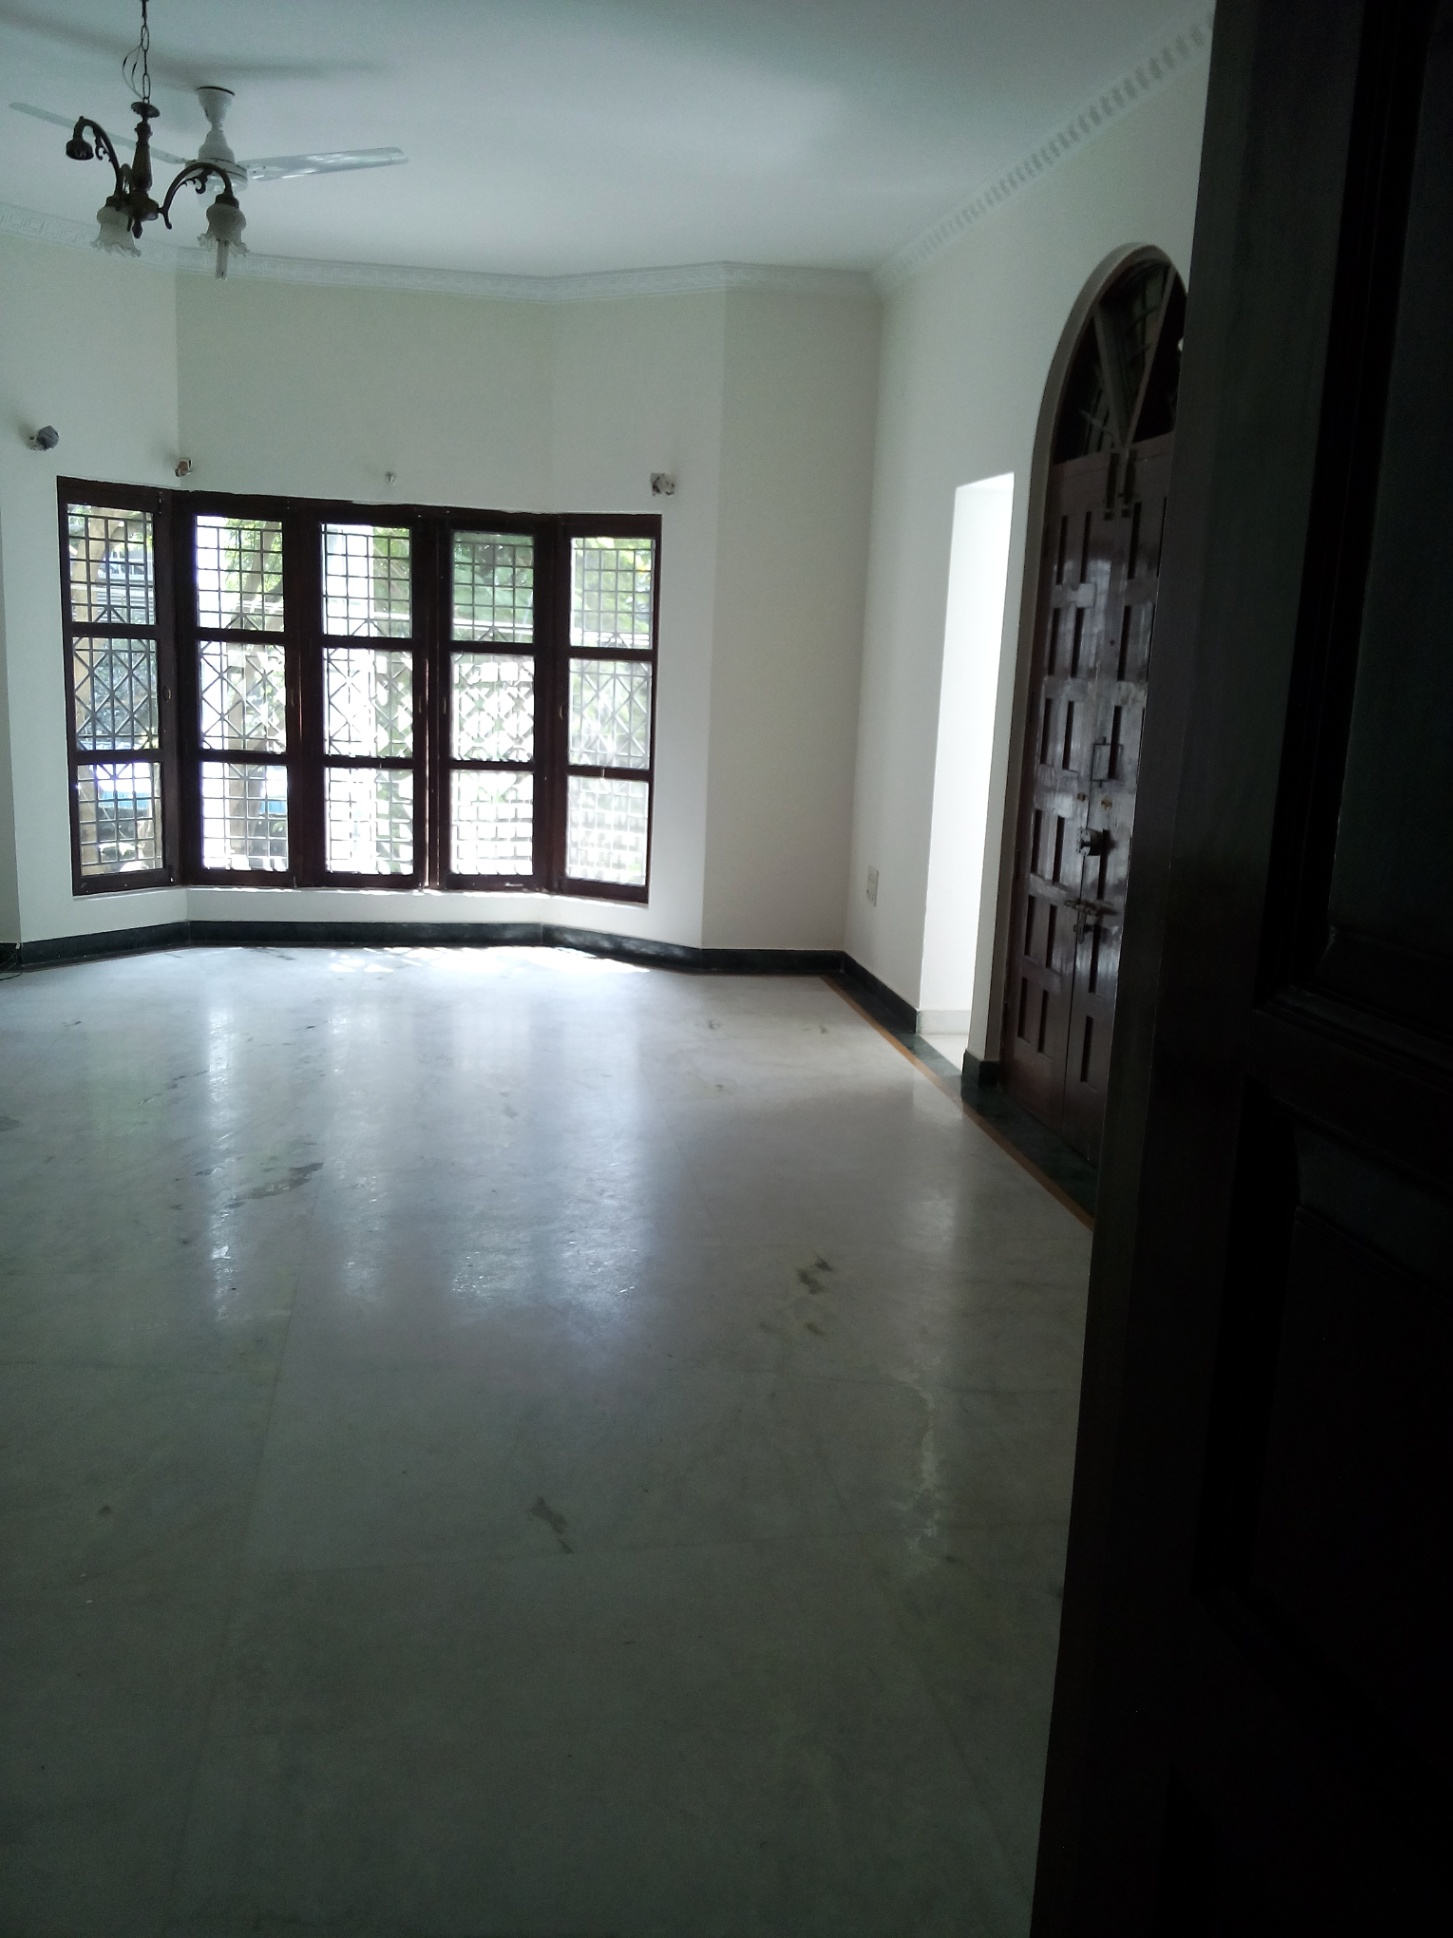 3 Bed/ 3 Bath Rent Apartment/ Flat; 2,250 sq. ft. carpet area, Semi Furnished for rent @Domlur 2nd Stage 